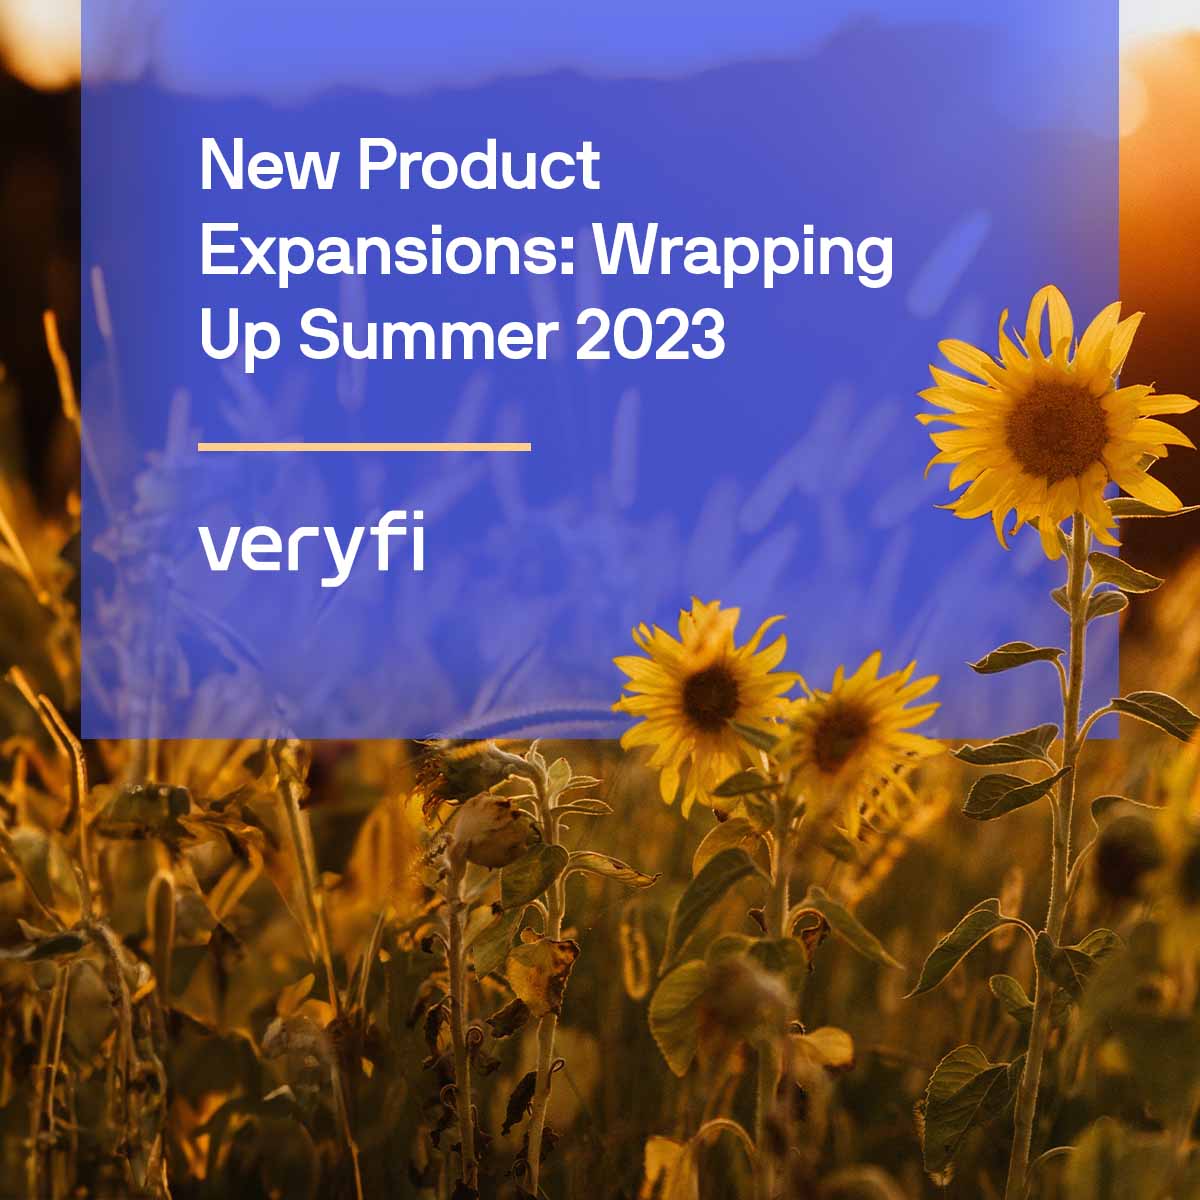 New Product Expansions: Wrapping Up Summer 2023